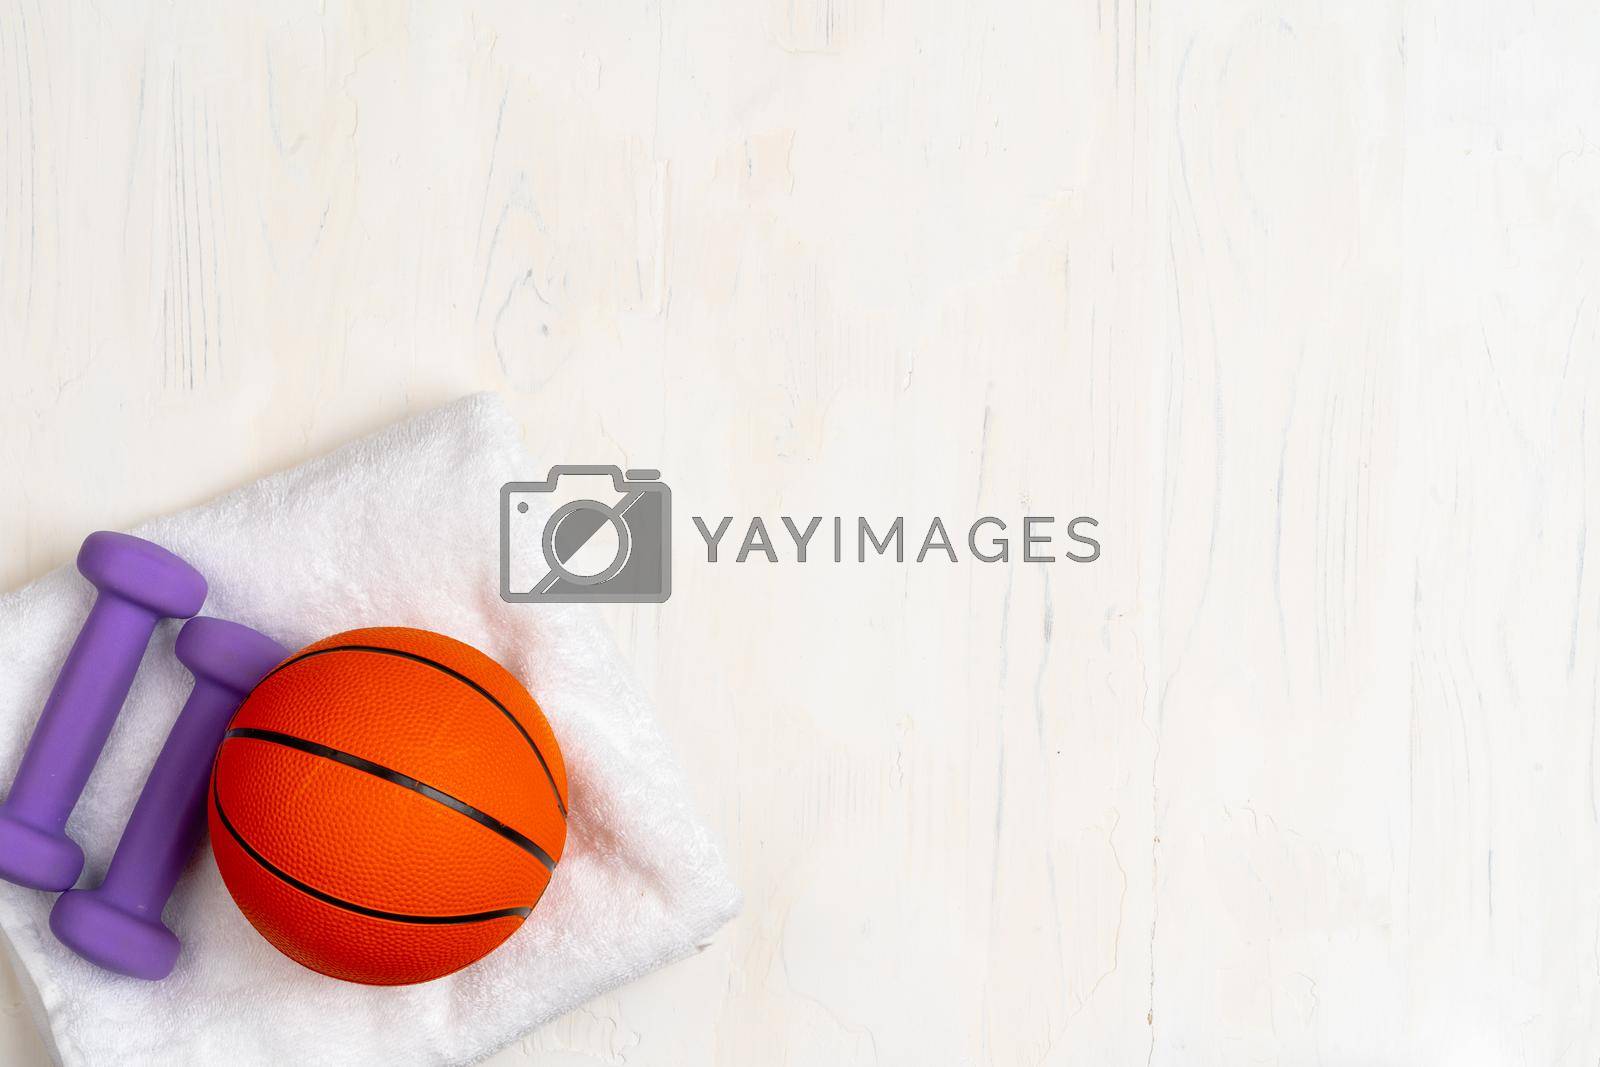 Royalty free image of Ball for basketball game, view from above by Fabrikasimf